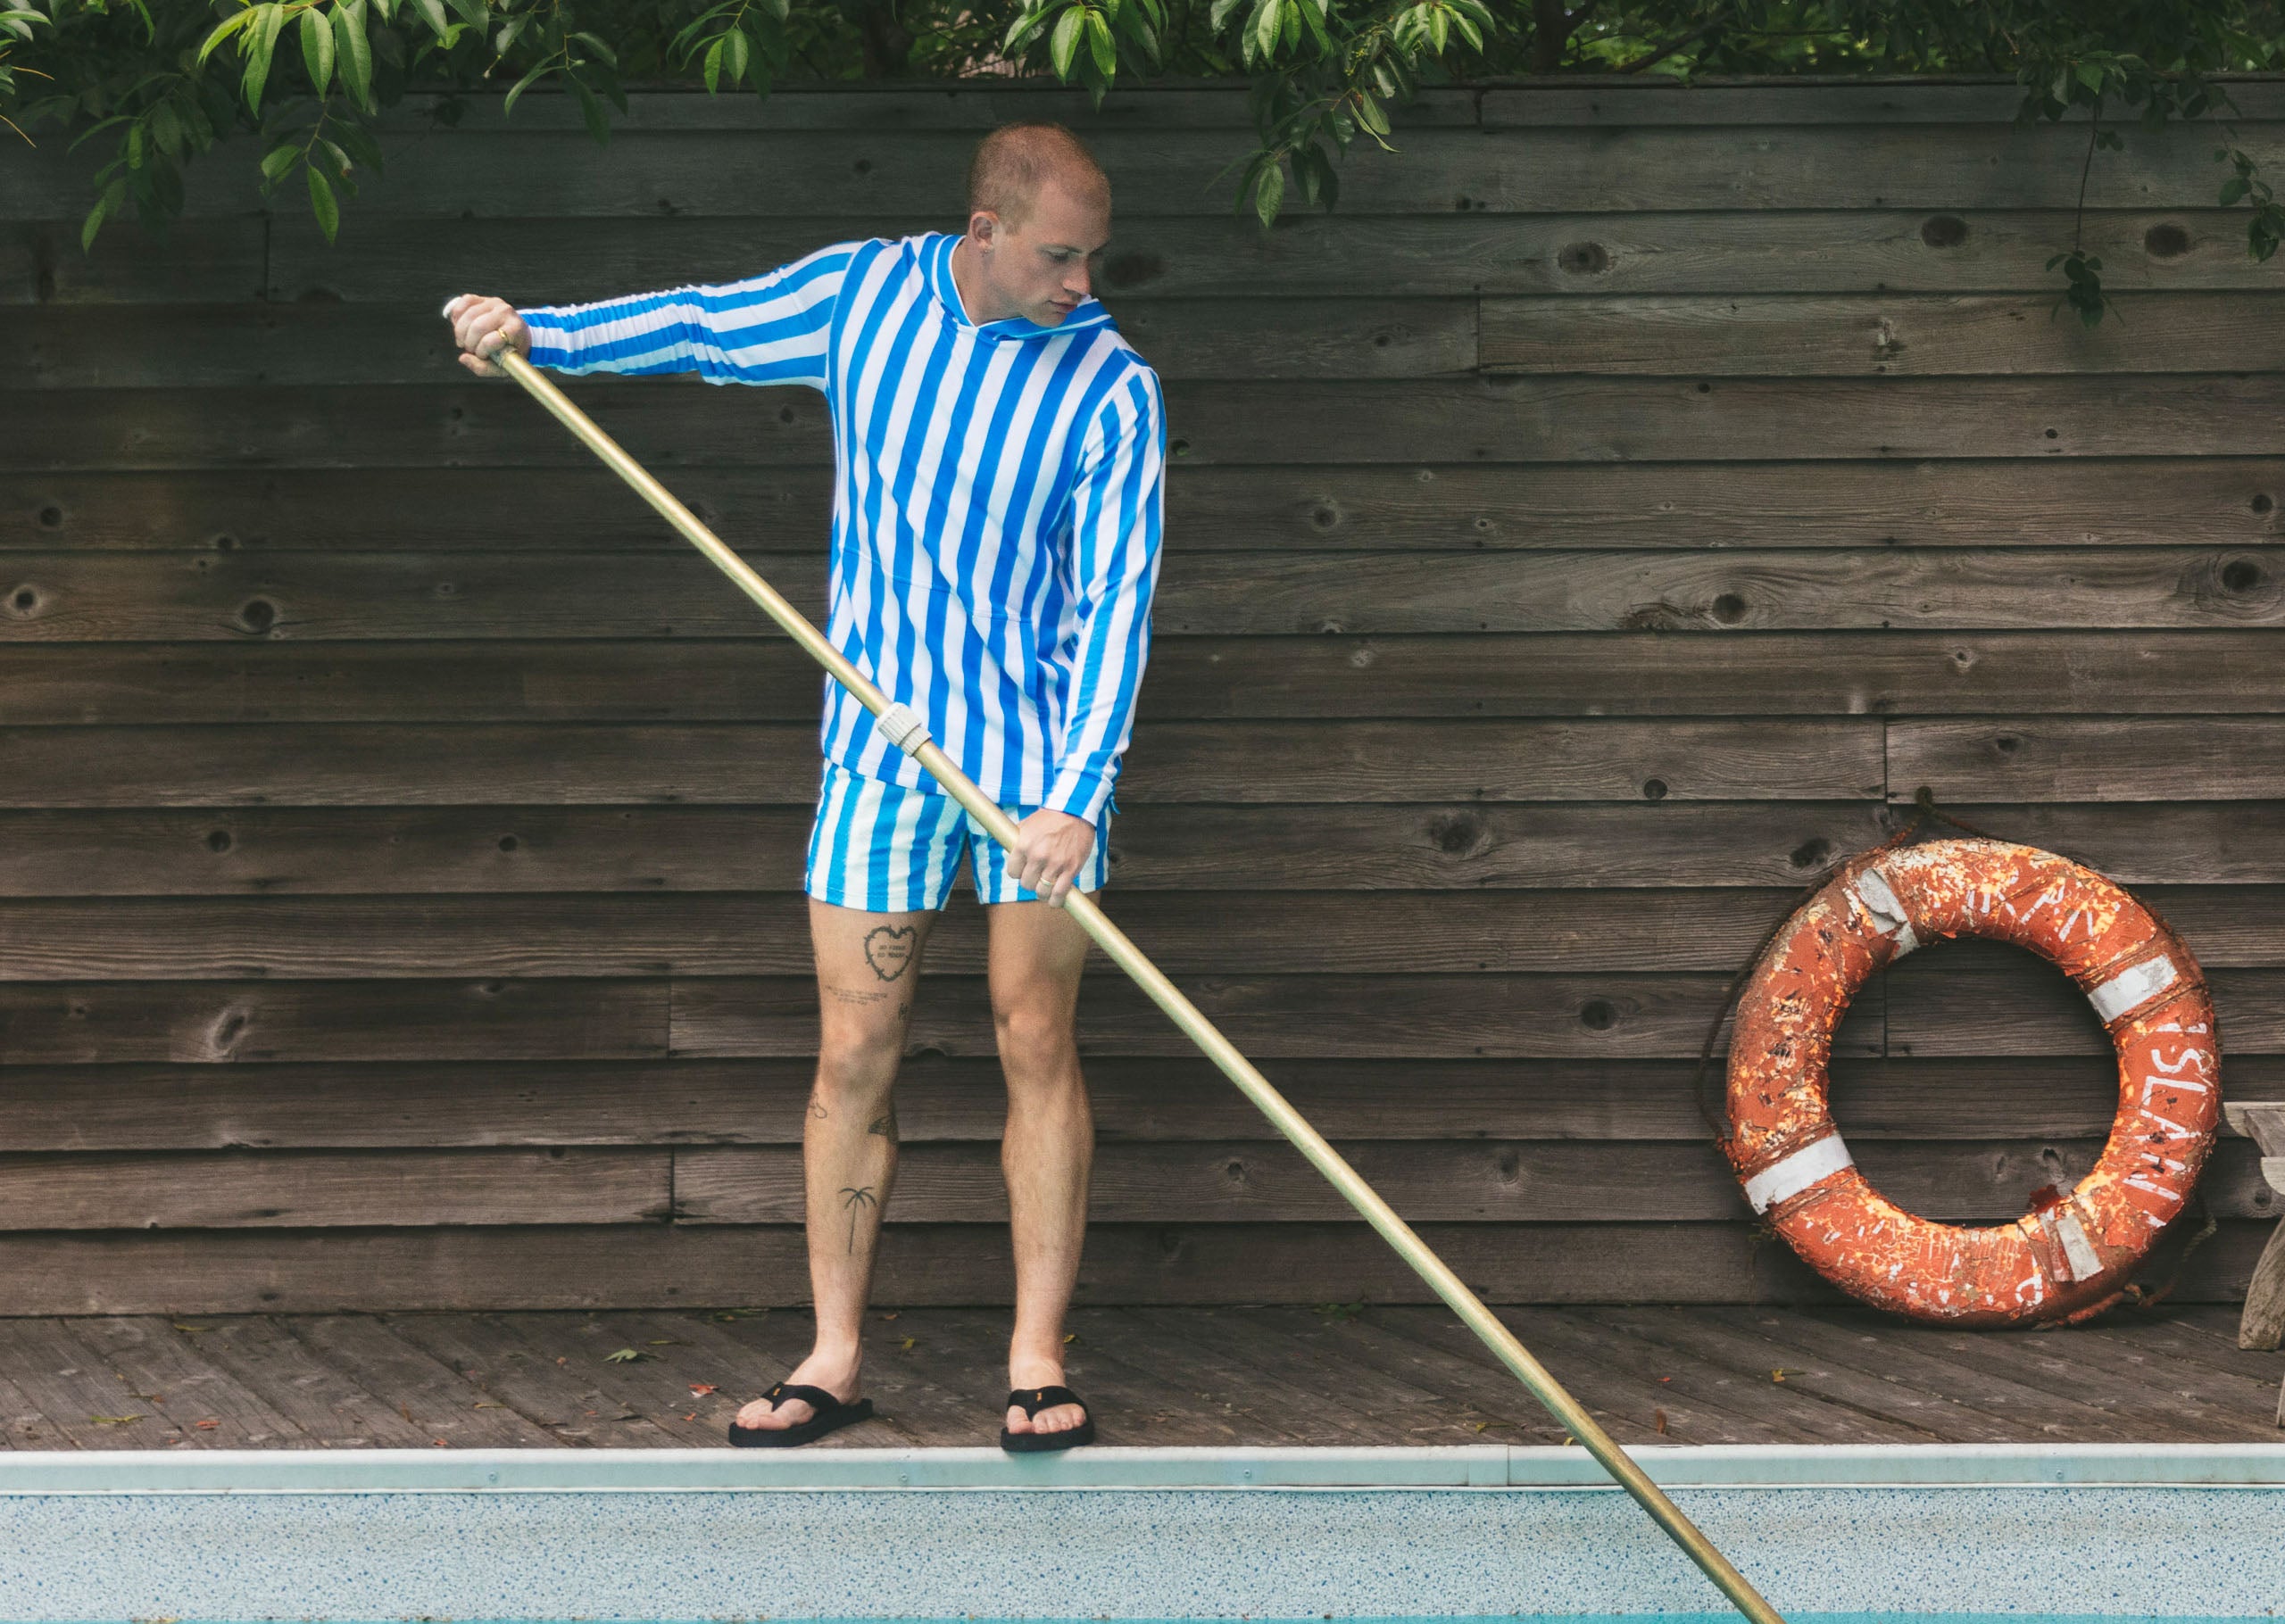 Man cleaning pool wearing blue and white stripped hoodie and shorts.